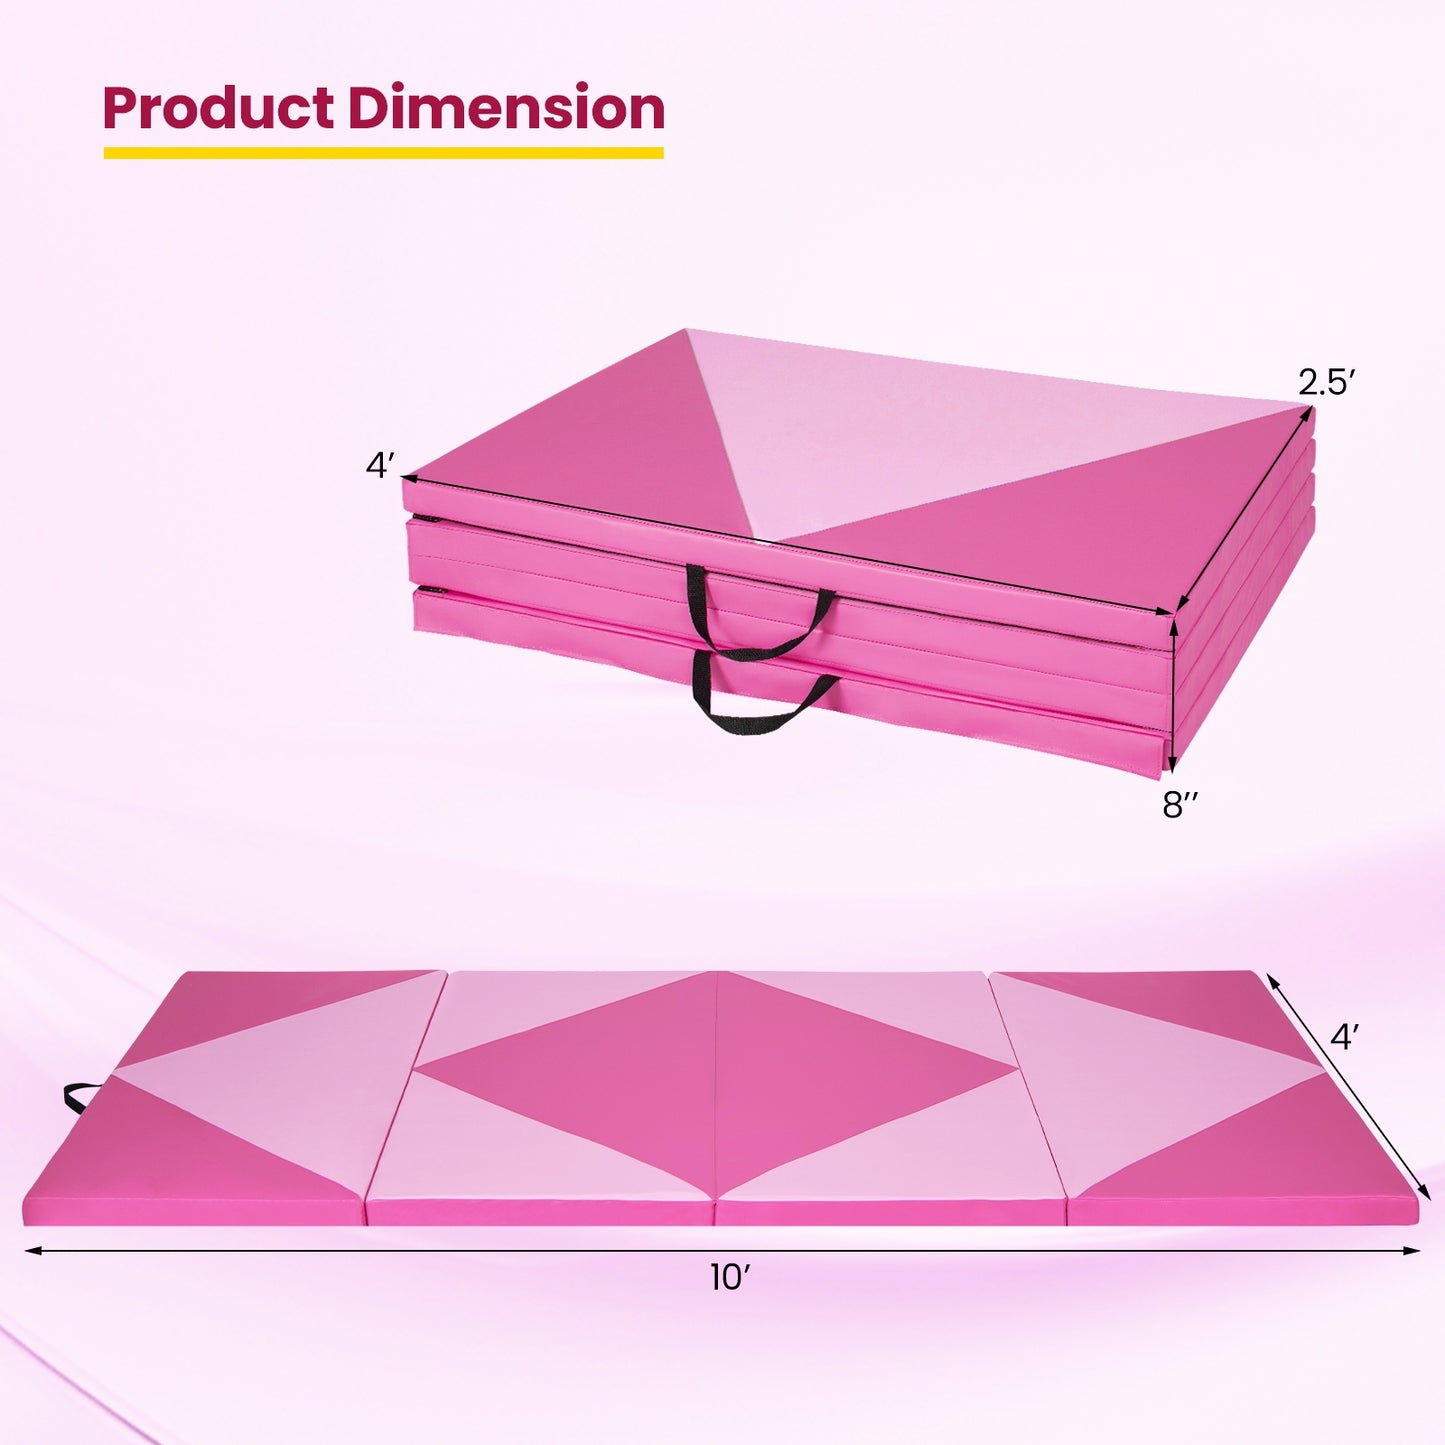 4-Panel PU Leather Folding Exercise Gym Mat with Hook and Loop Fasteners-Pink